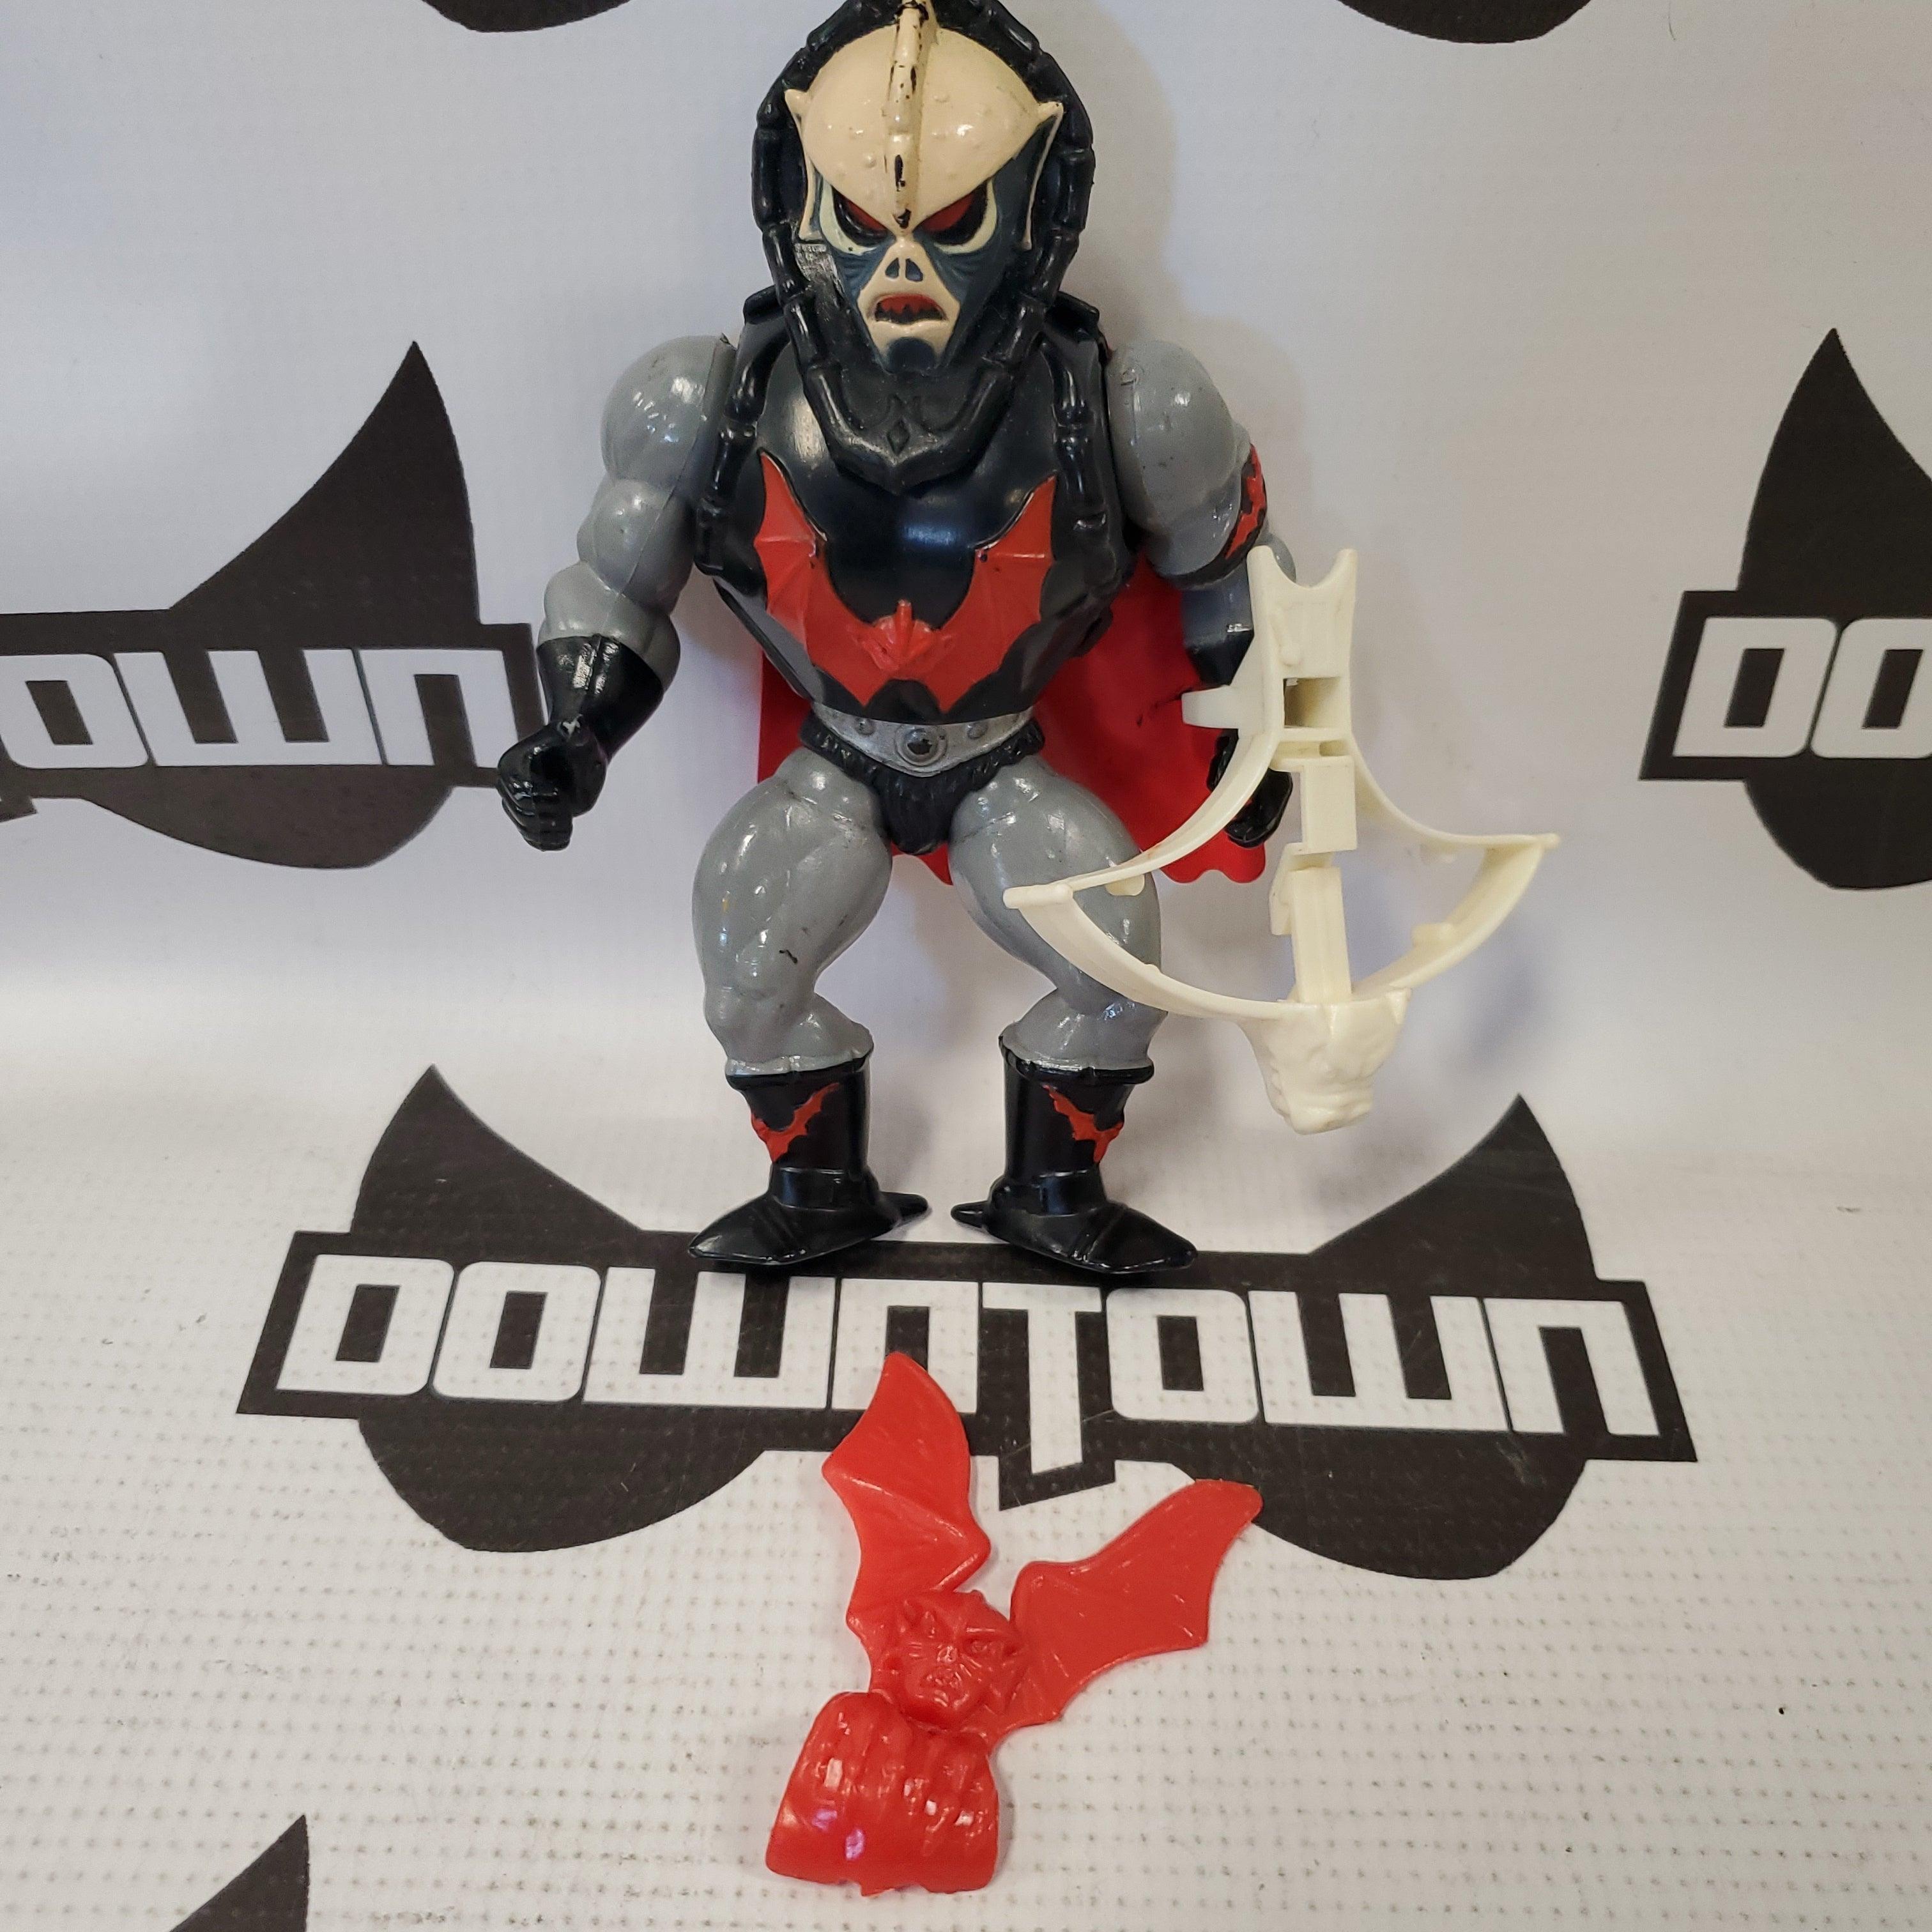 MATTEL MASTERS OF THE UNIVERSE- Hordak - Rogue Toys